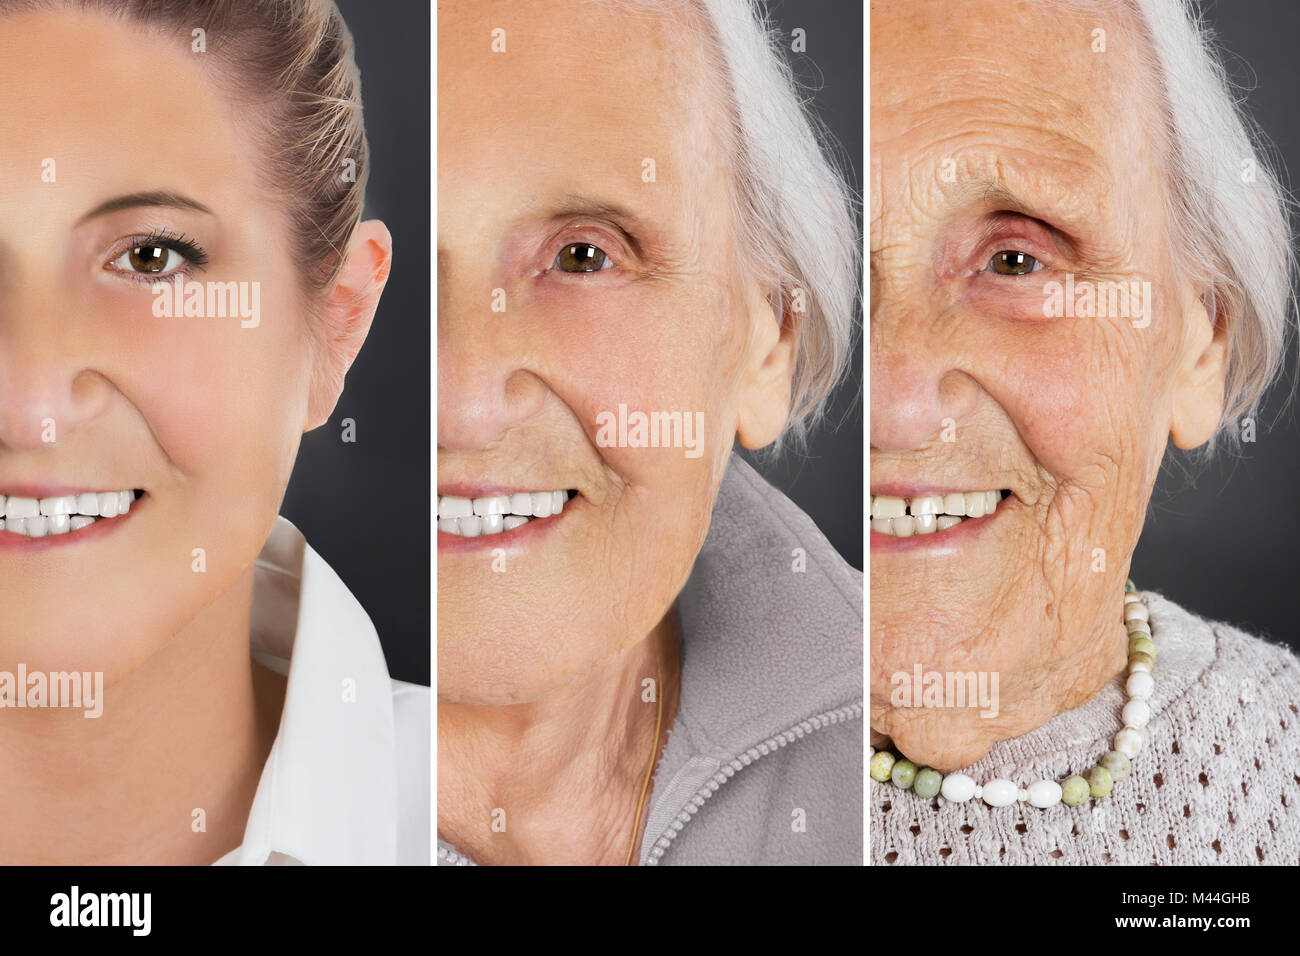 Multiple image showing ageing process of woman over gray background Stock Photo